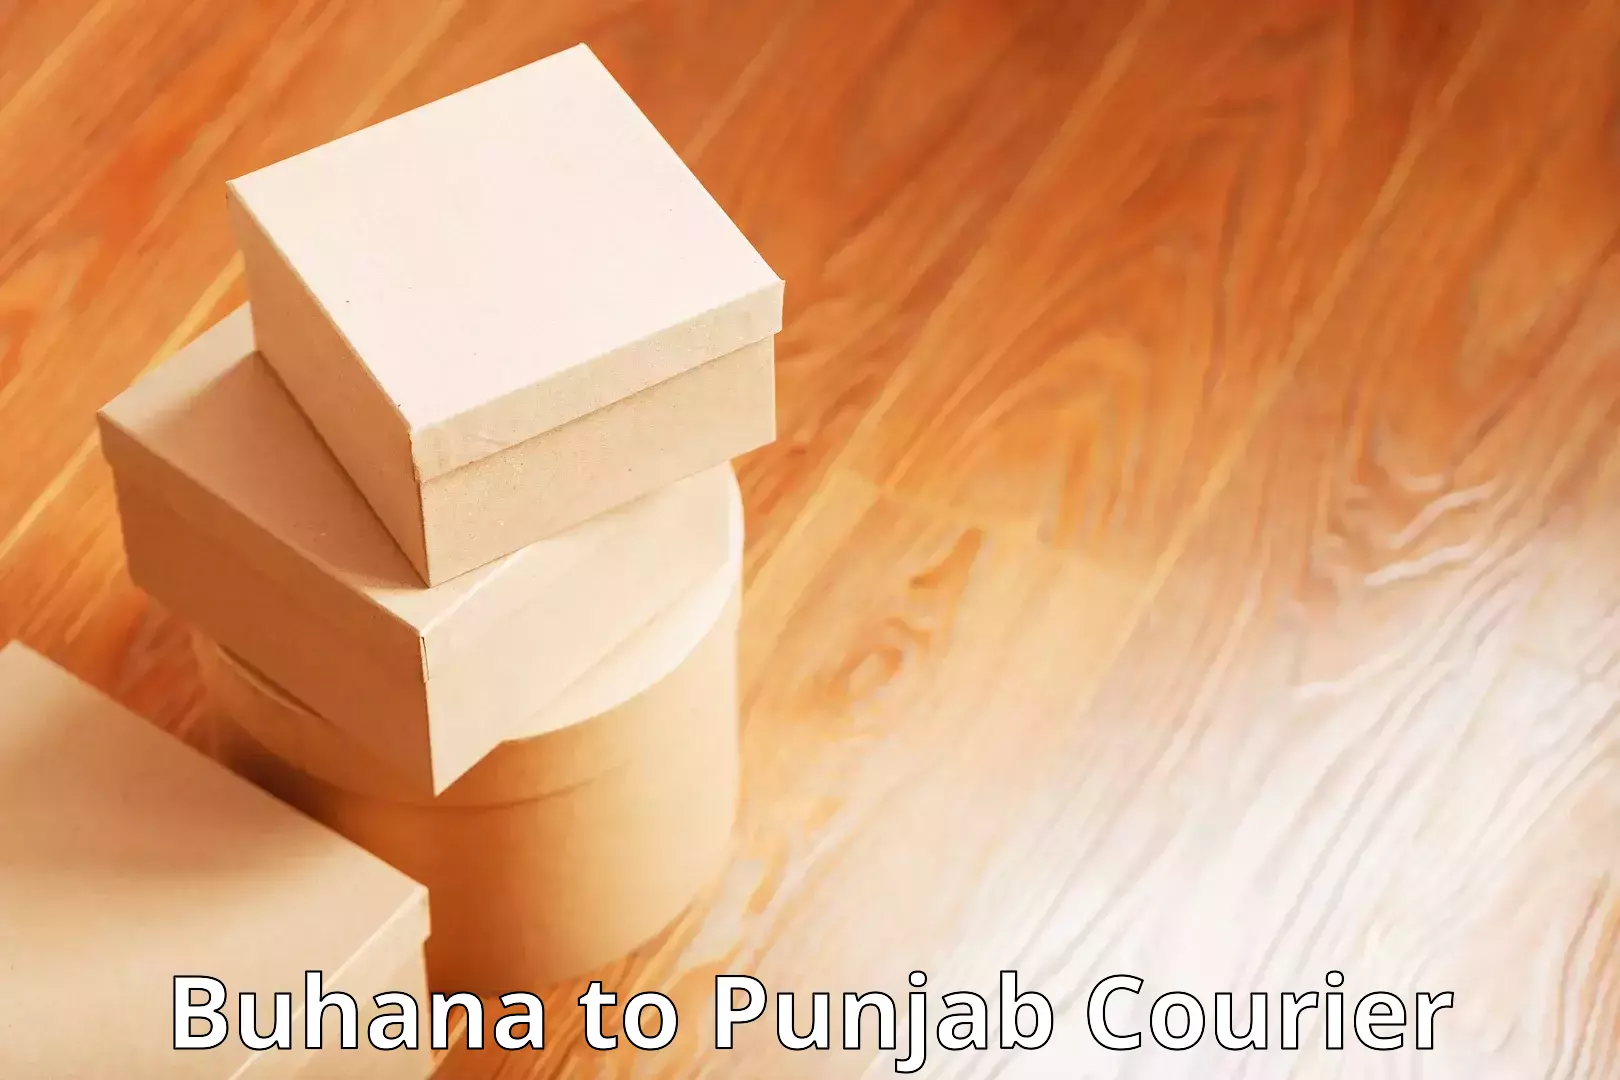 Automated parcel services Buhana to Ludhiana